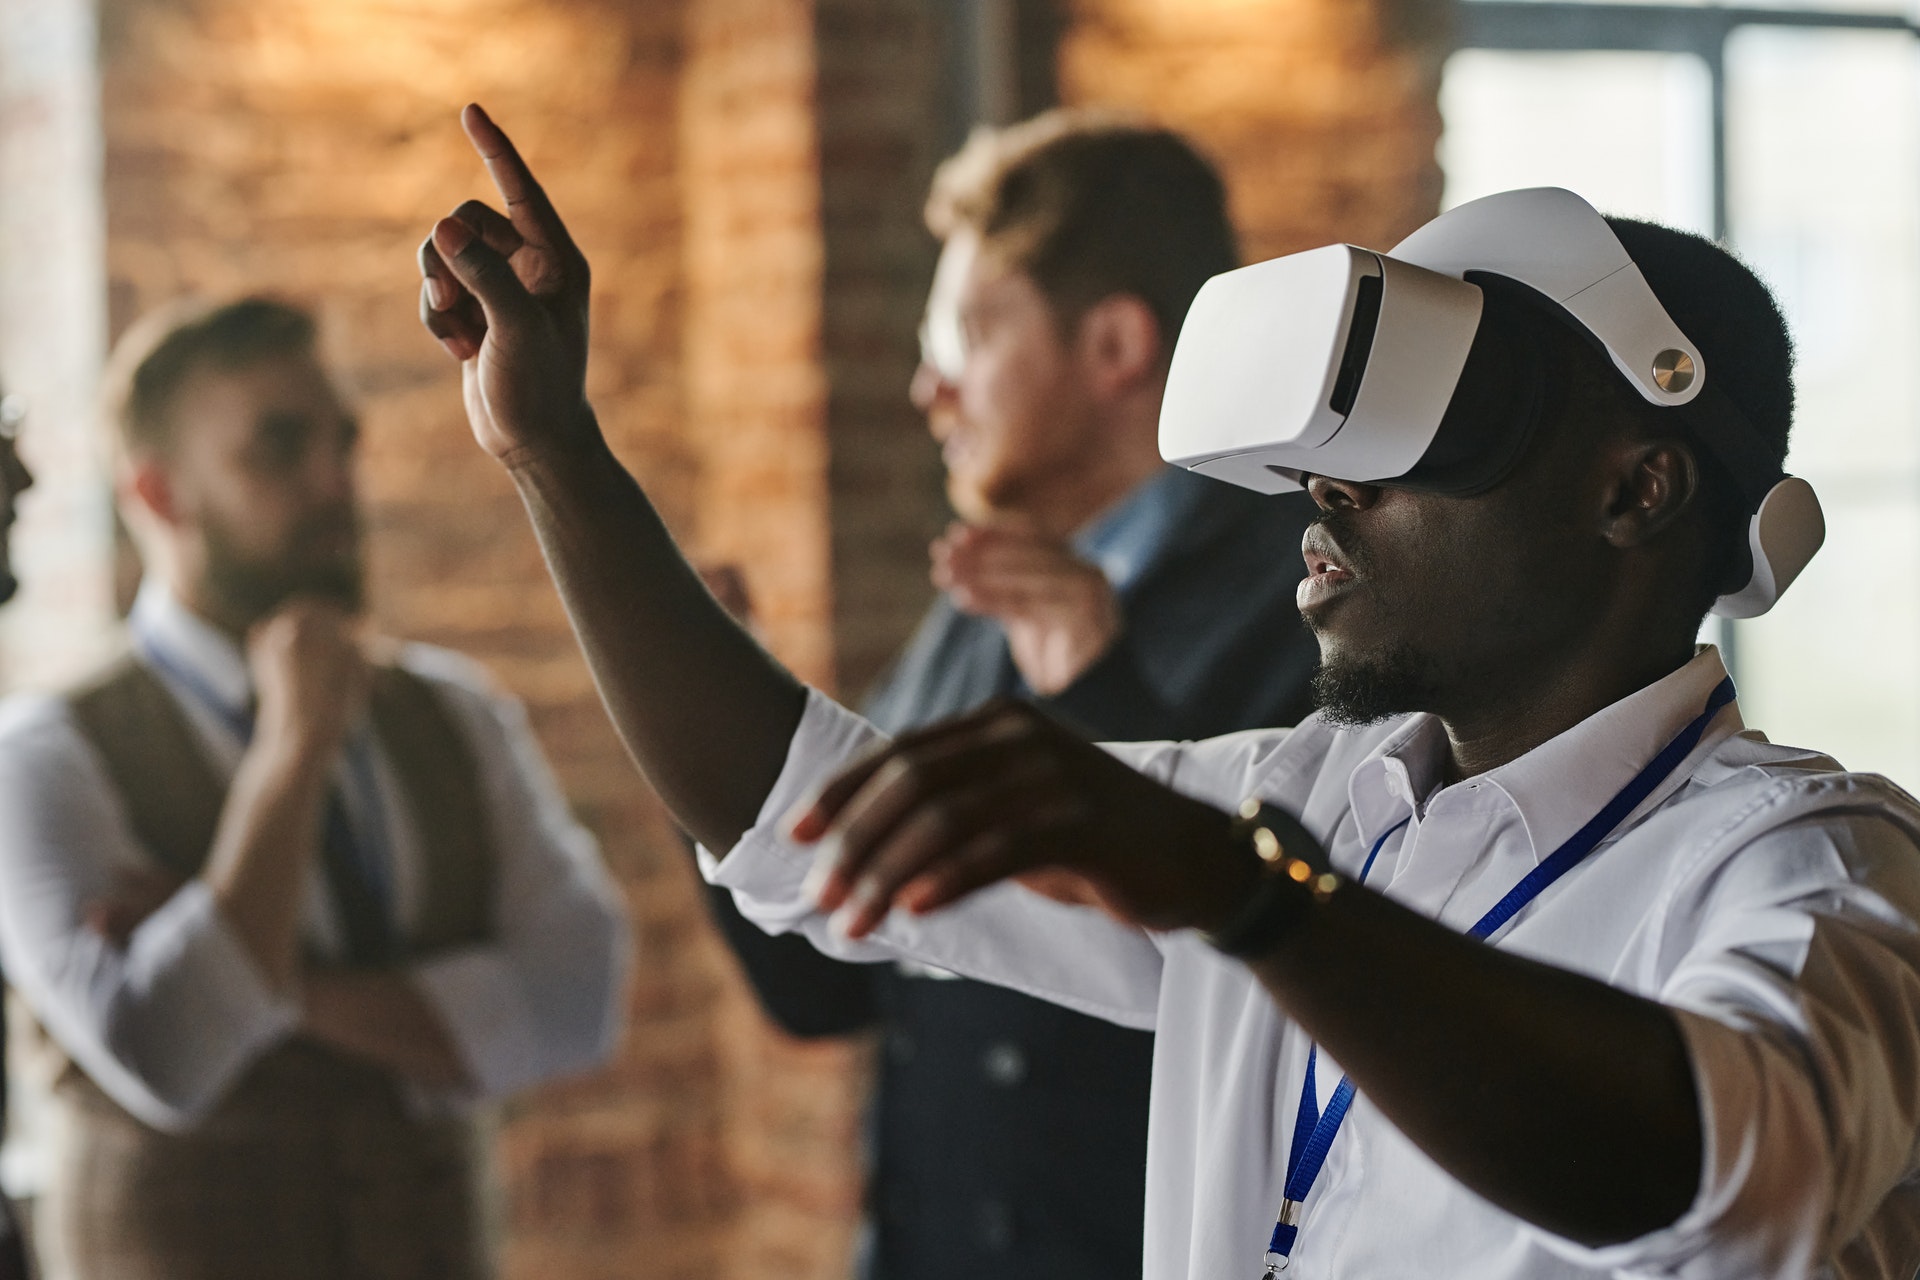 INSEAD to Amplify the Learning Experience for Its Executive MBA Students Using VR